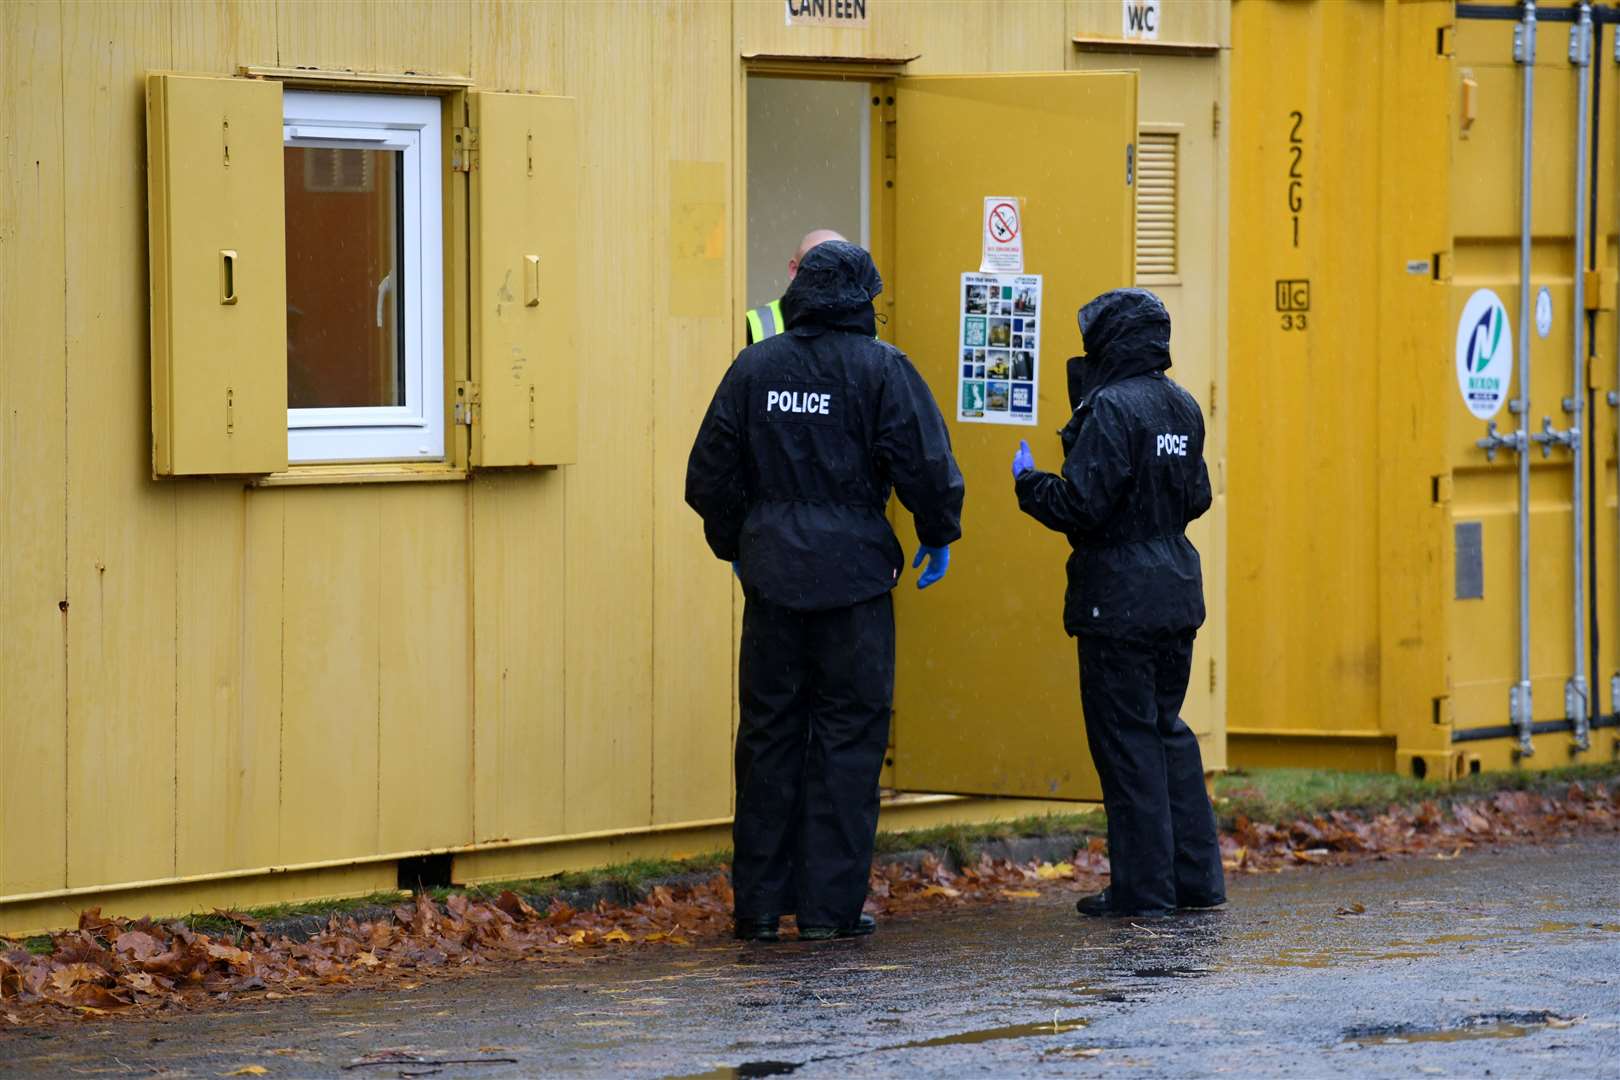 Police have been in the Dalneigh area today as part of the investigation.